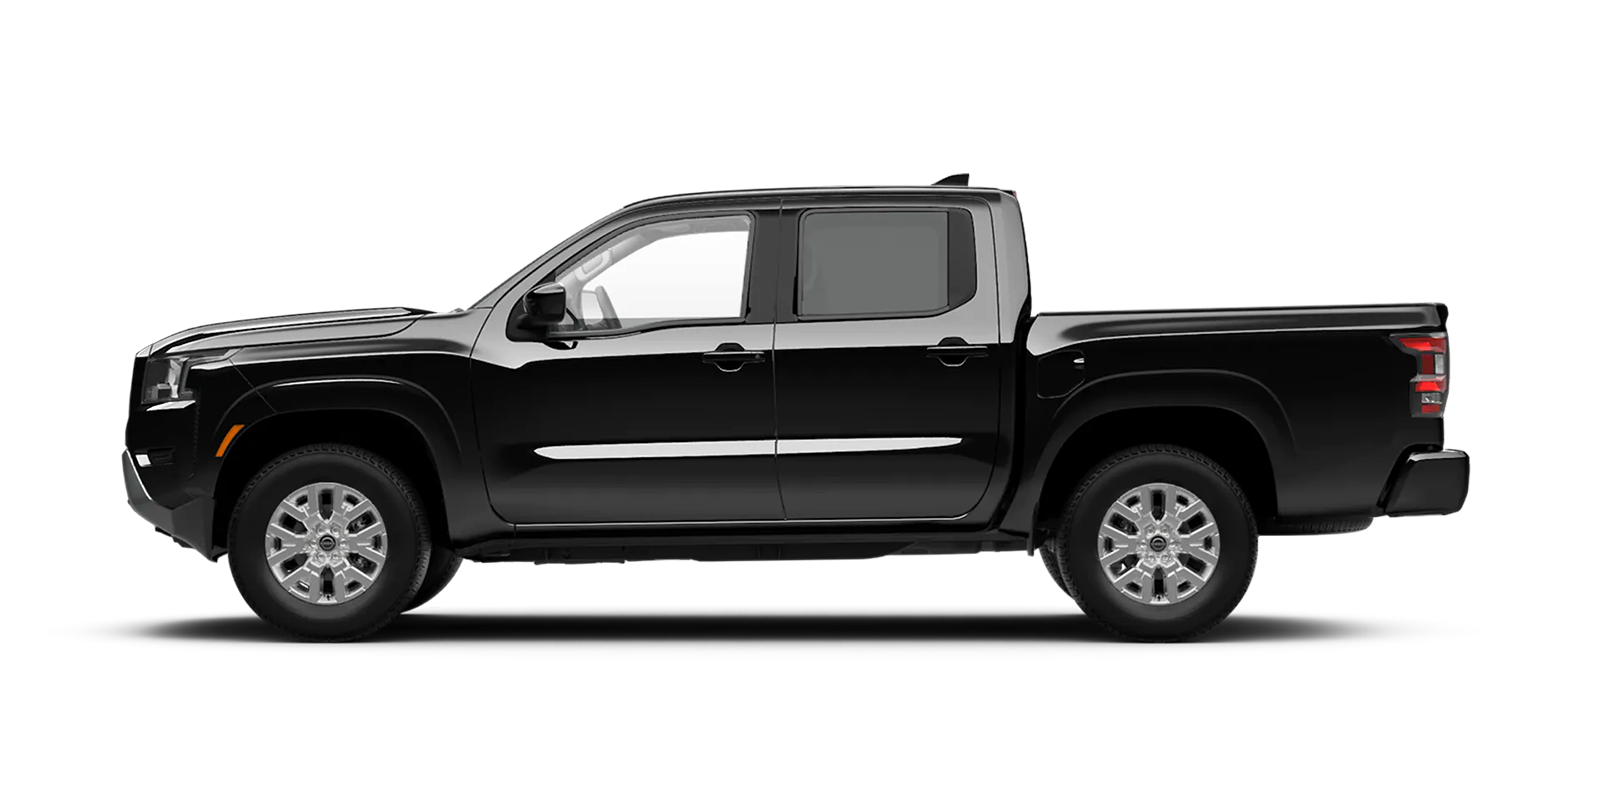 2022 Frontier Crew Cab SV 4x4 in Super Black | Rusty Wallace Nissan in Knoxville TN